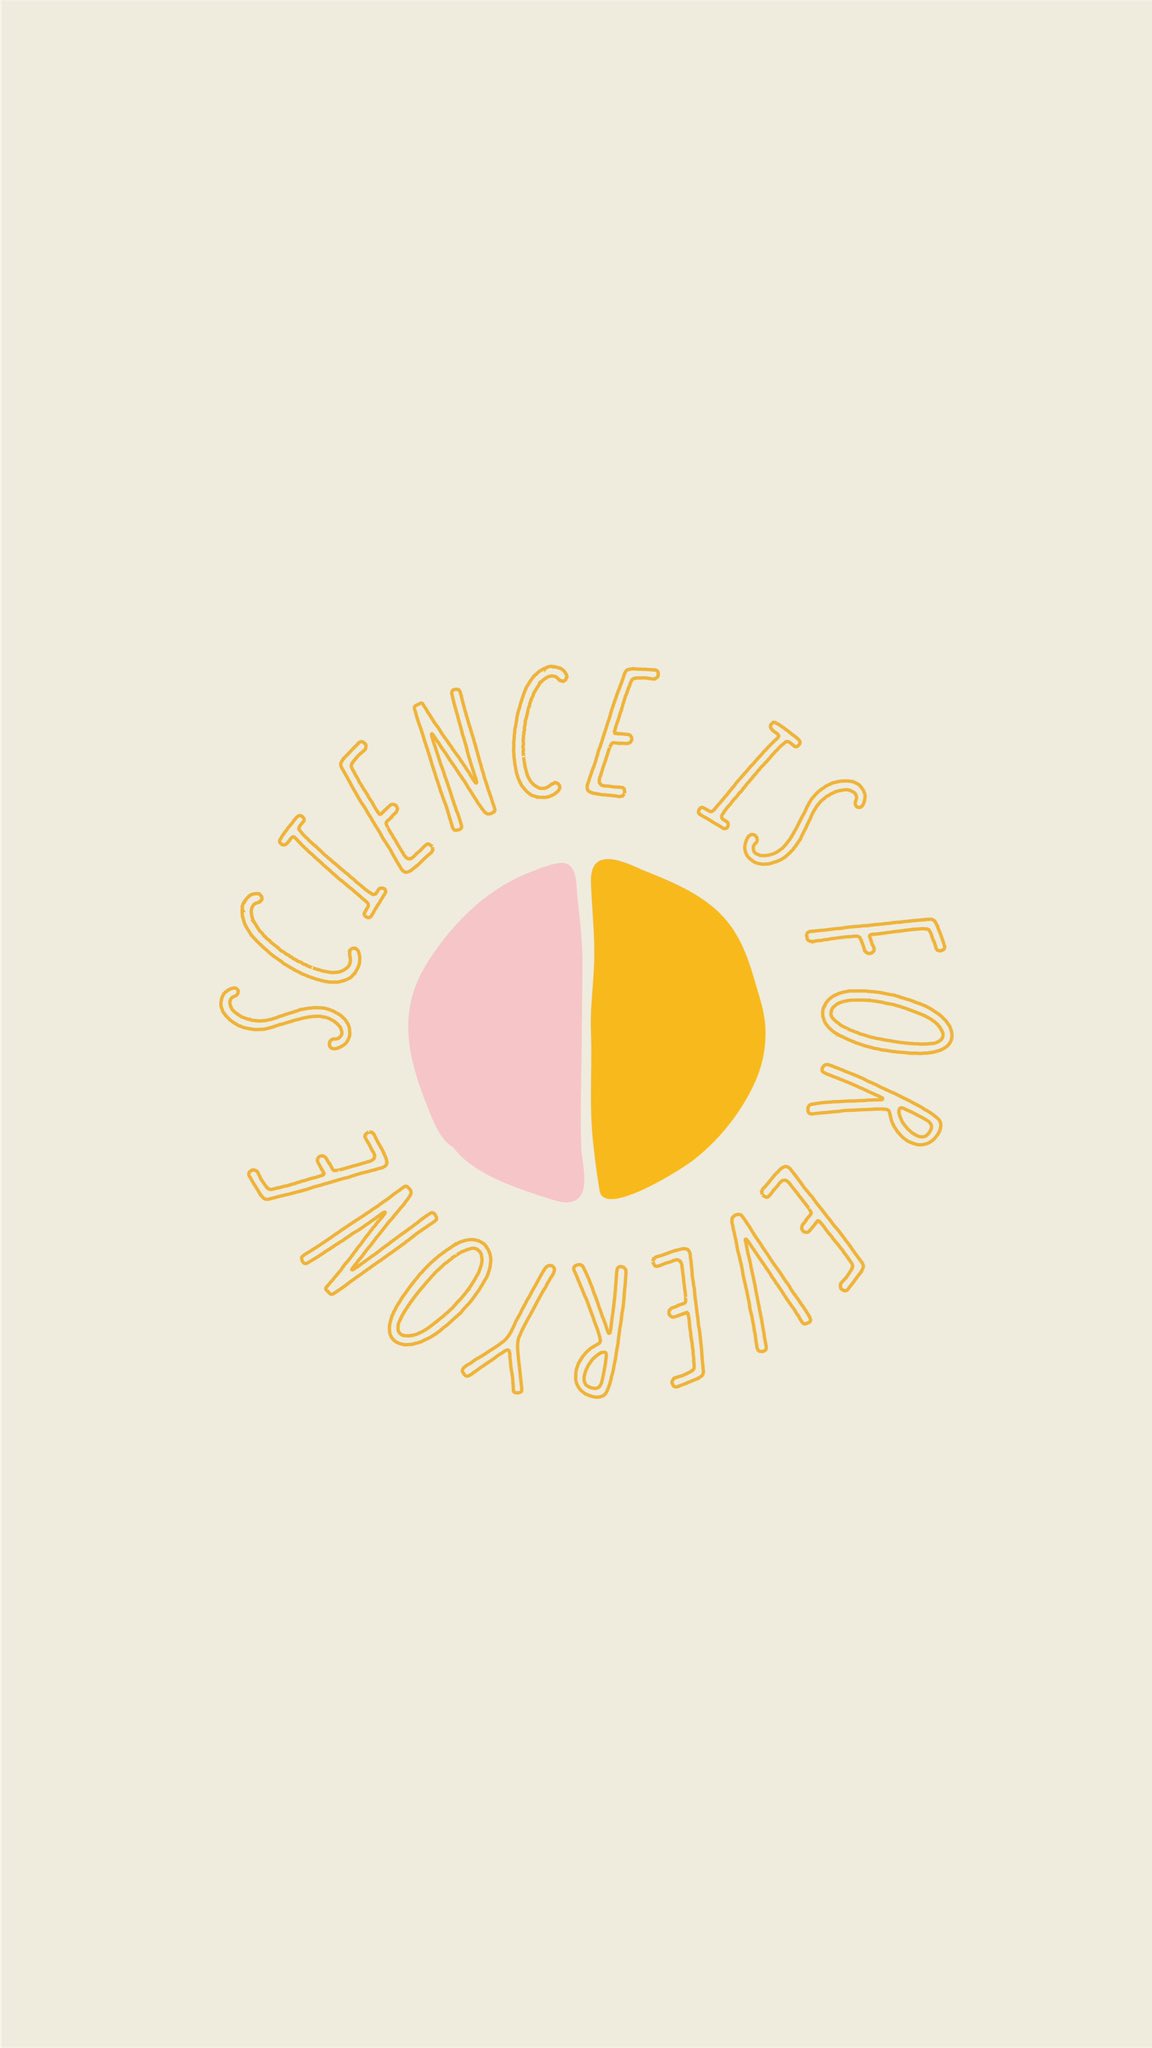 Science is for everyone - Science